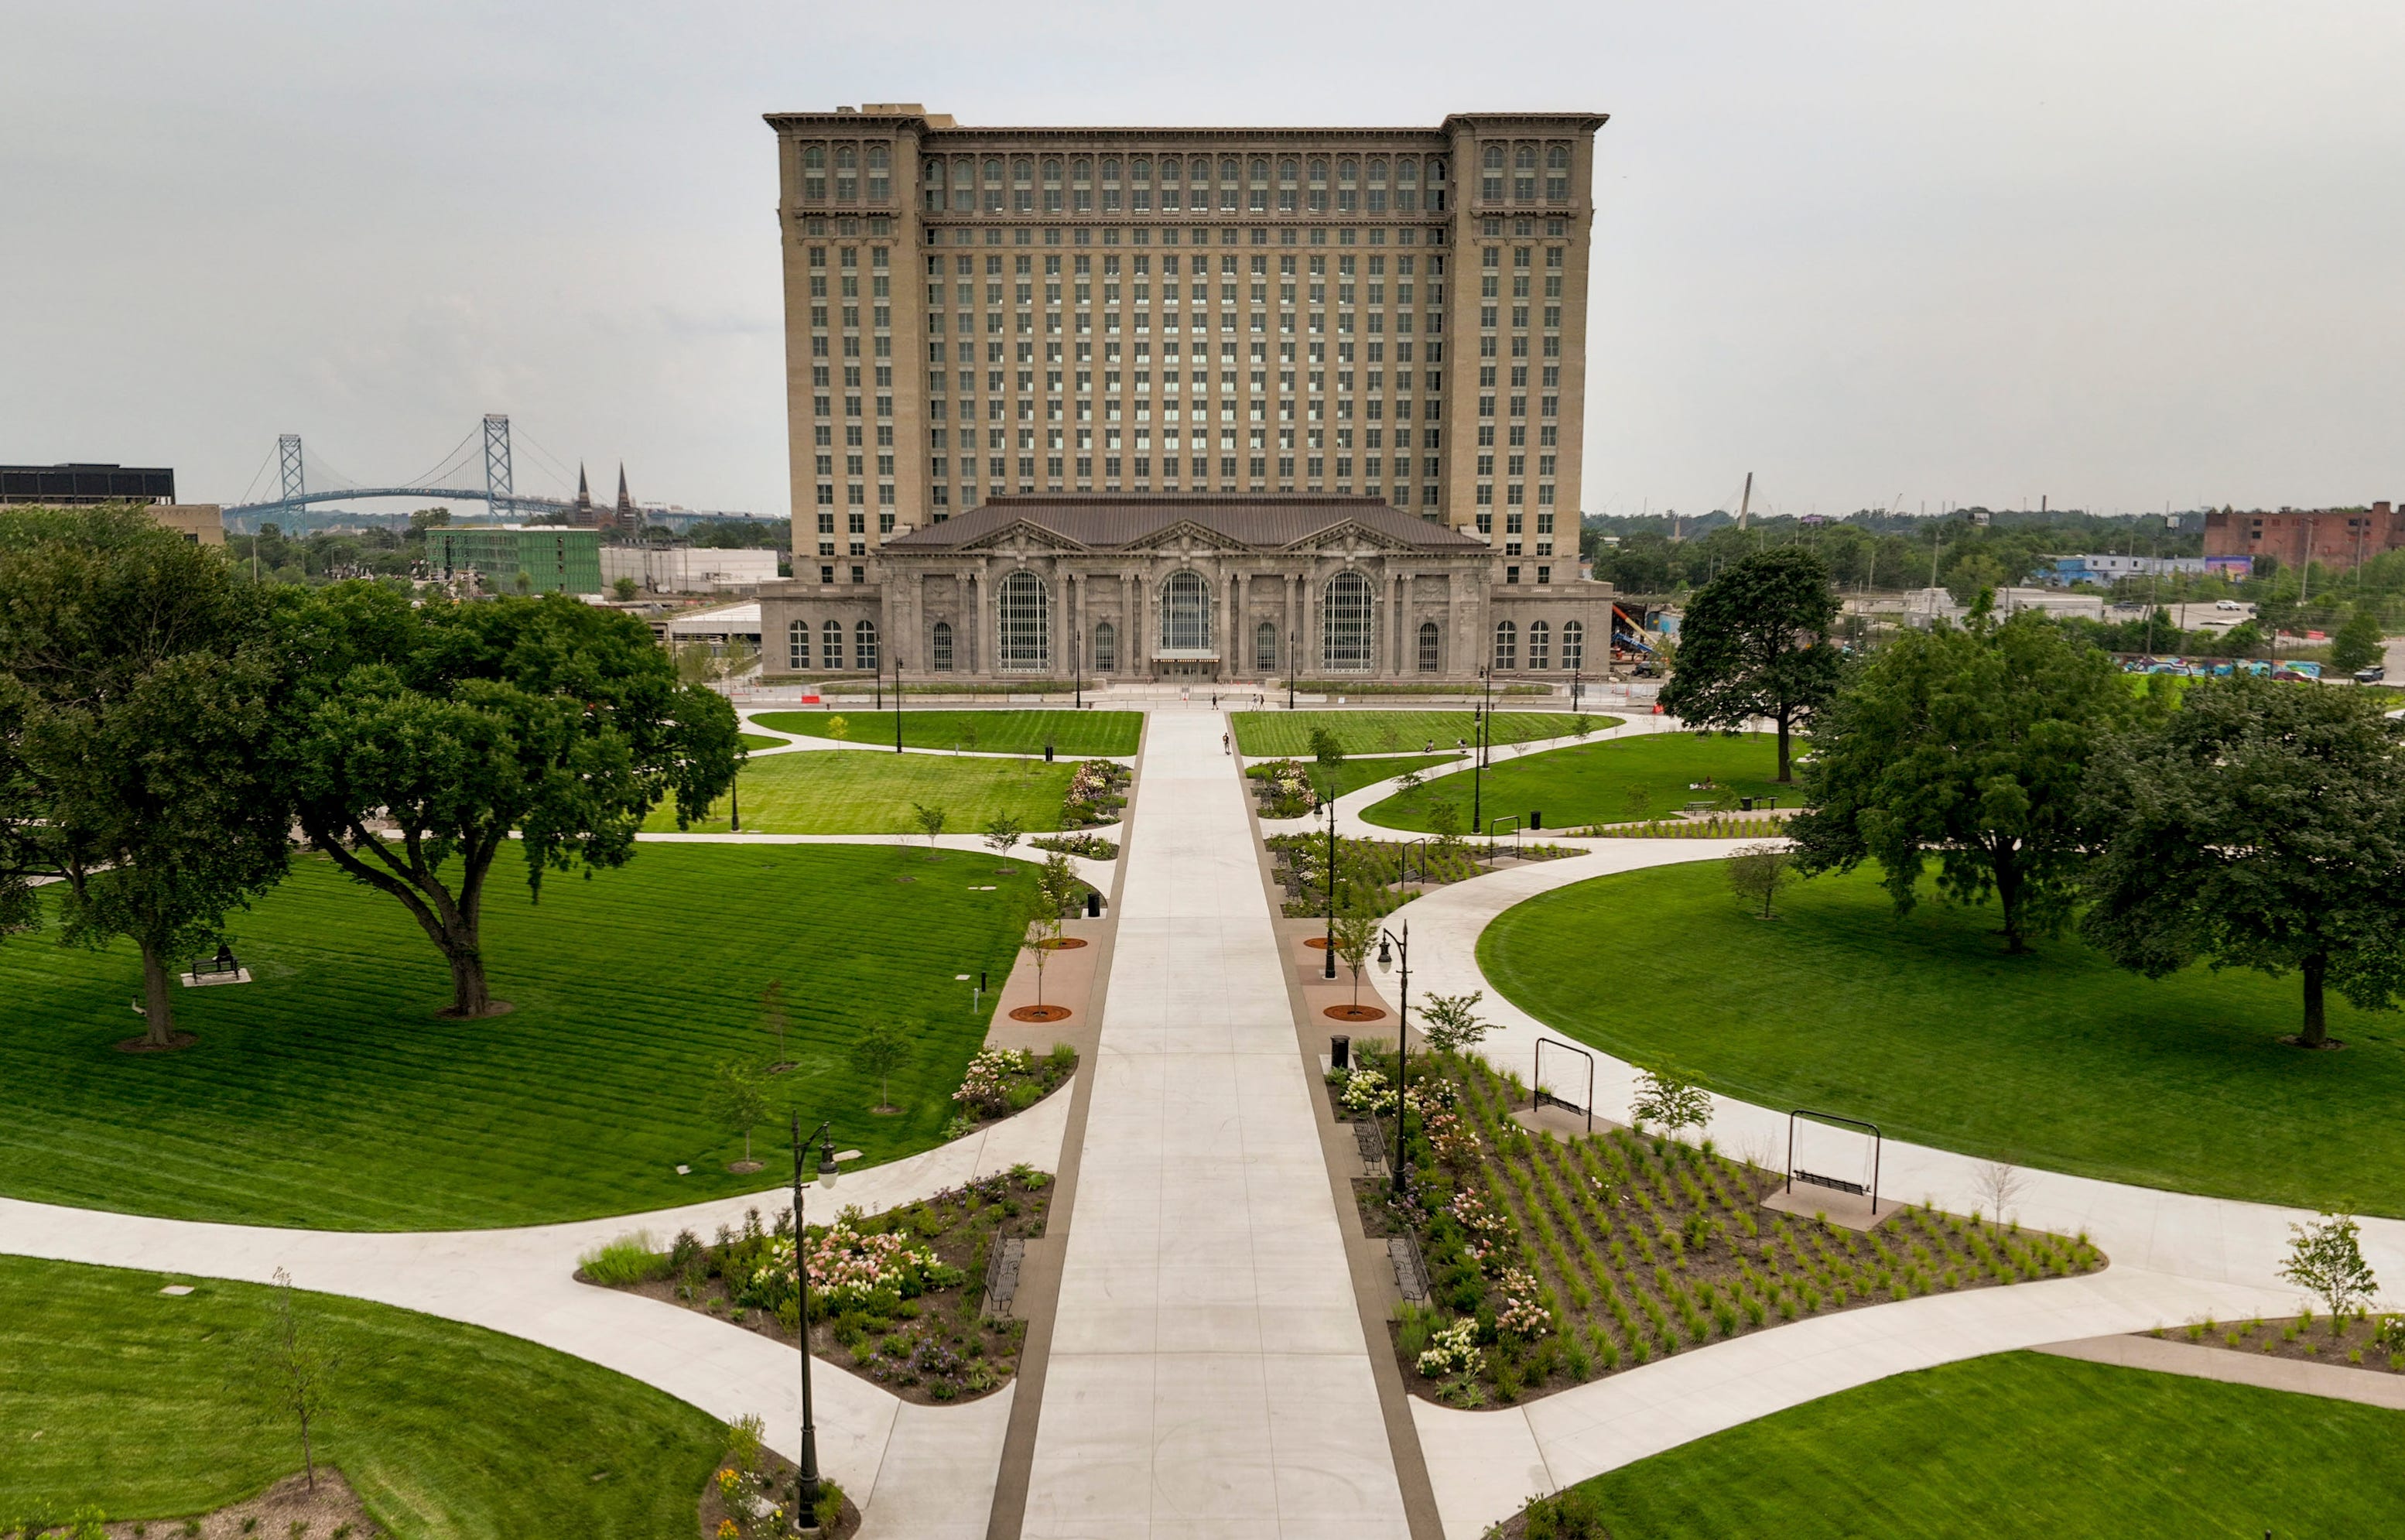 The renovated Michigan Central Station at Roosevelt Park in Detroit.